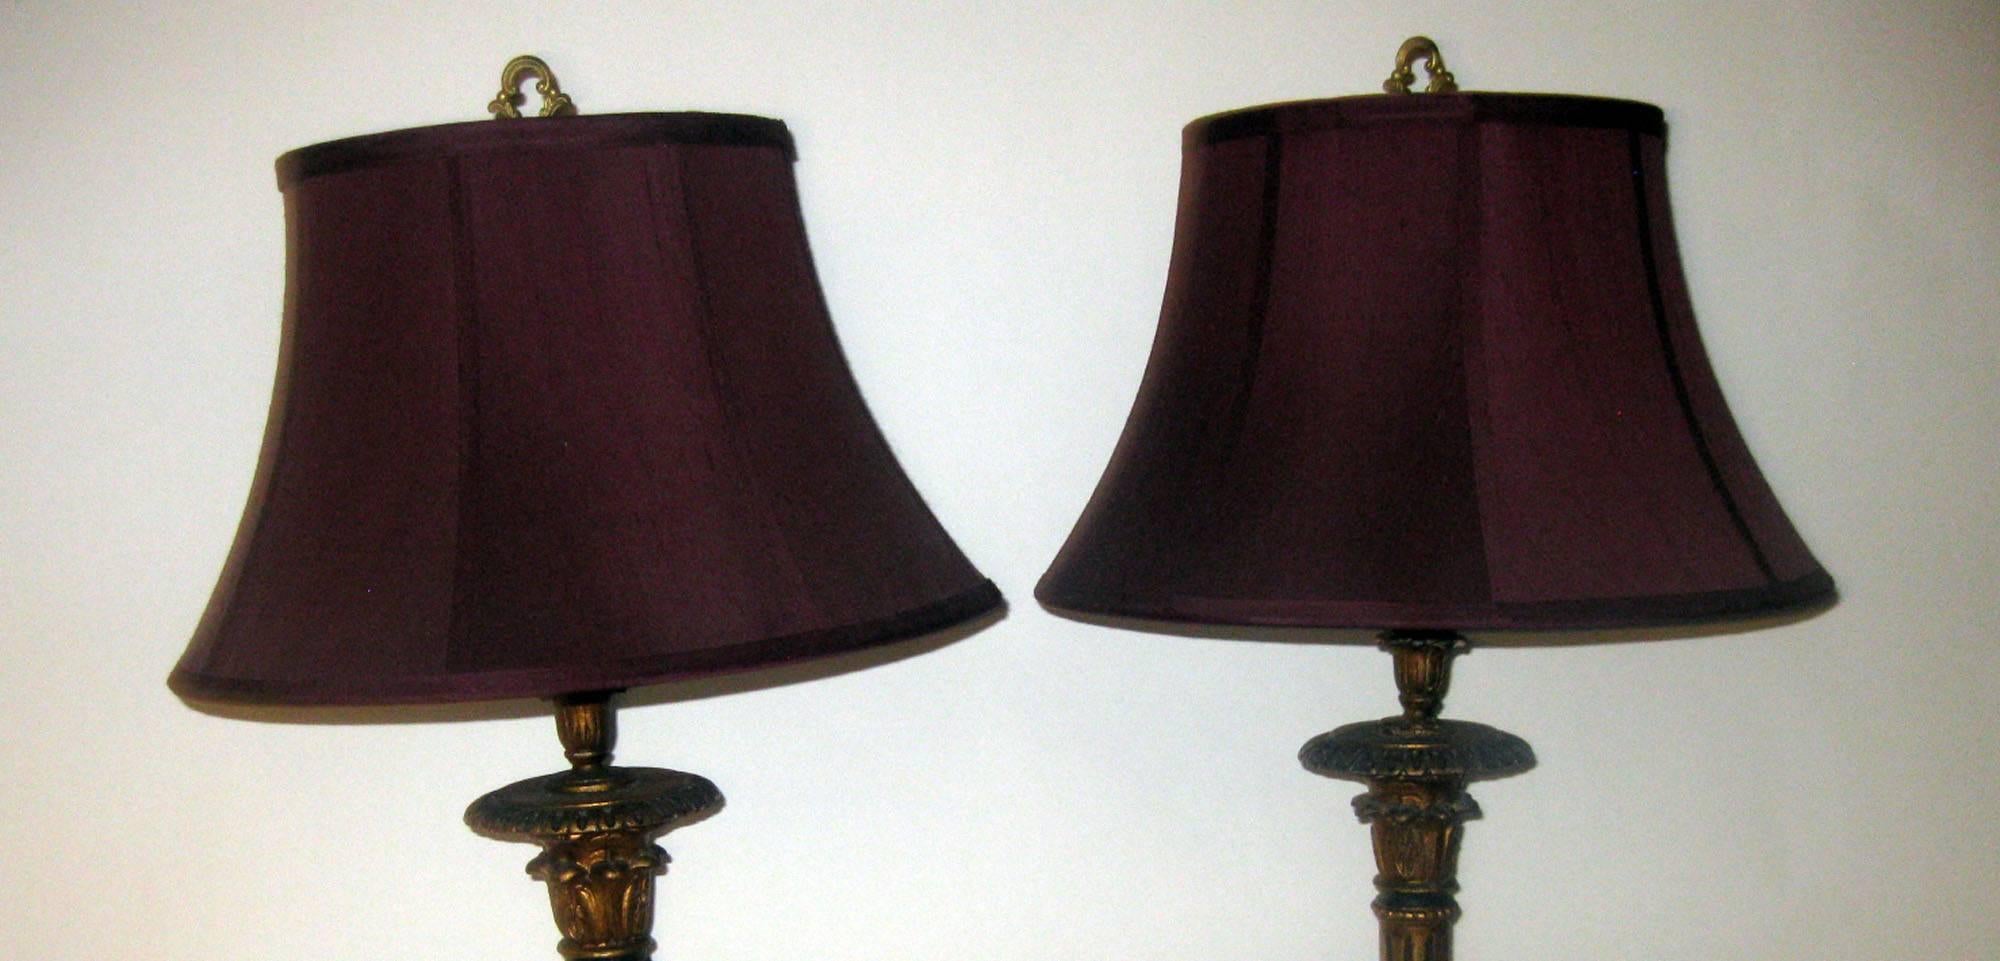 19th century Giltwood Converted Candlestick Lamp Pair For Sale 2